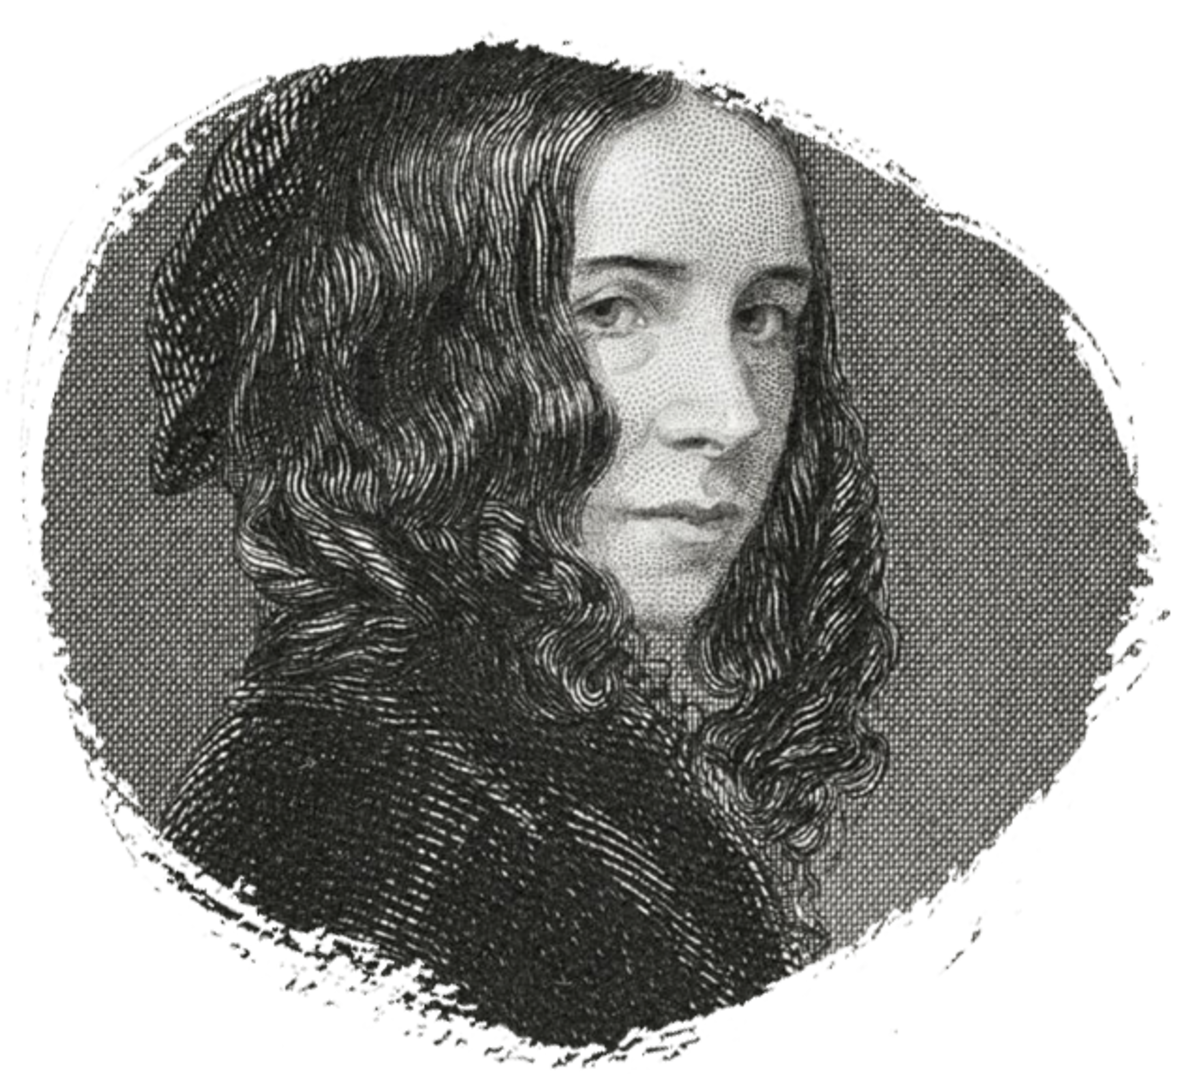 Analysis of Poem 'I think of thee' (Sonnet 29) by Elizabeth Barrett Browning